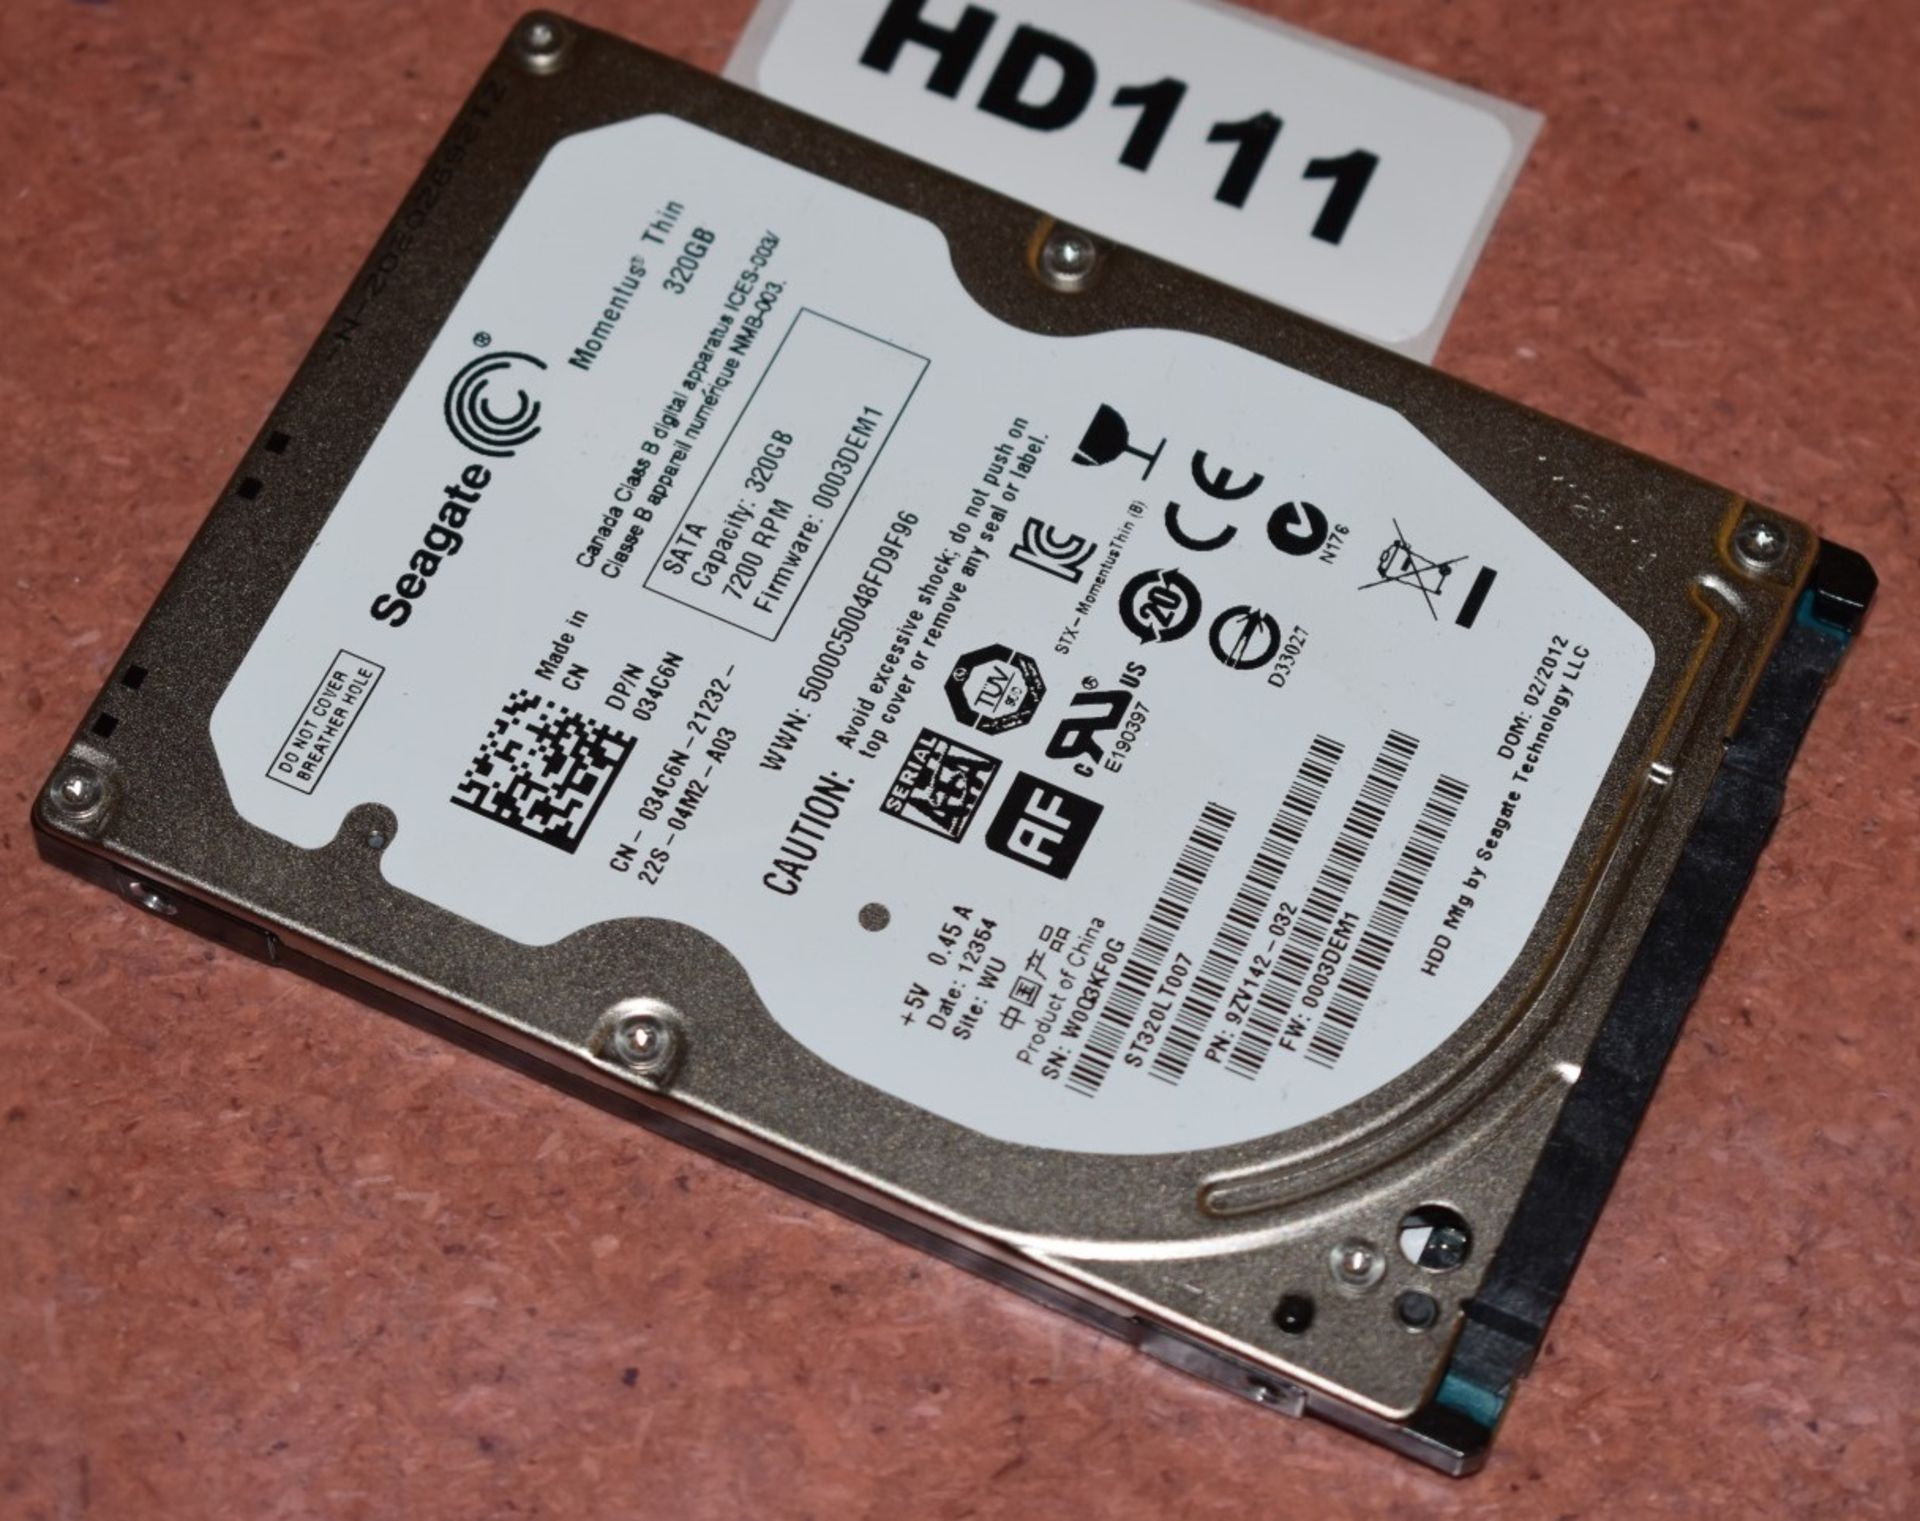 4 x Seagate Momentus Thin 320gb 2.5 Inch SATA Hard Drives - Tested and Formatted - HD121/120/111/122